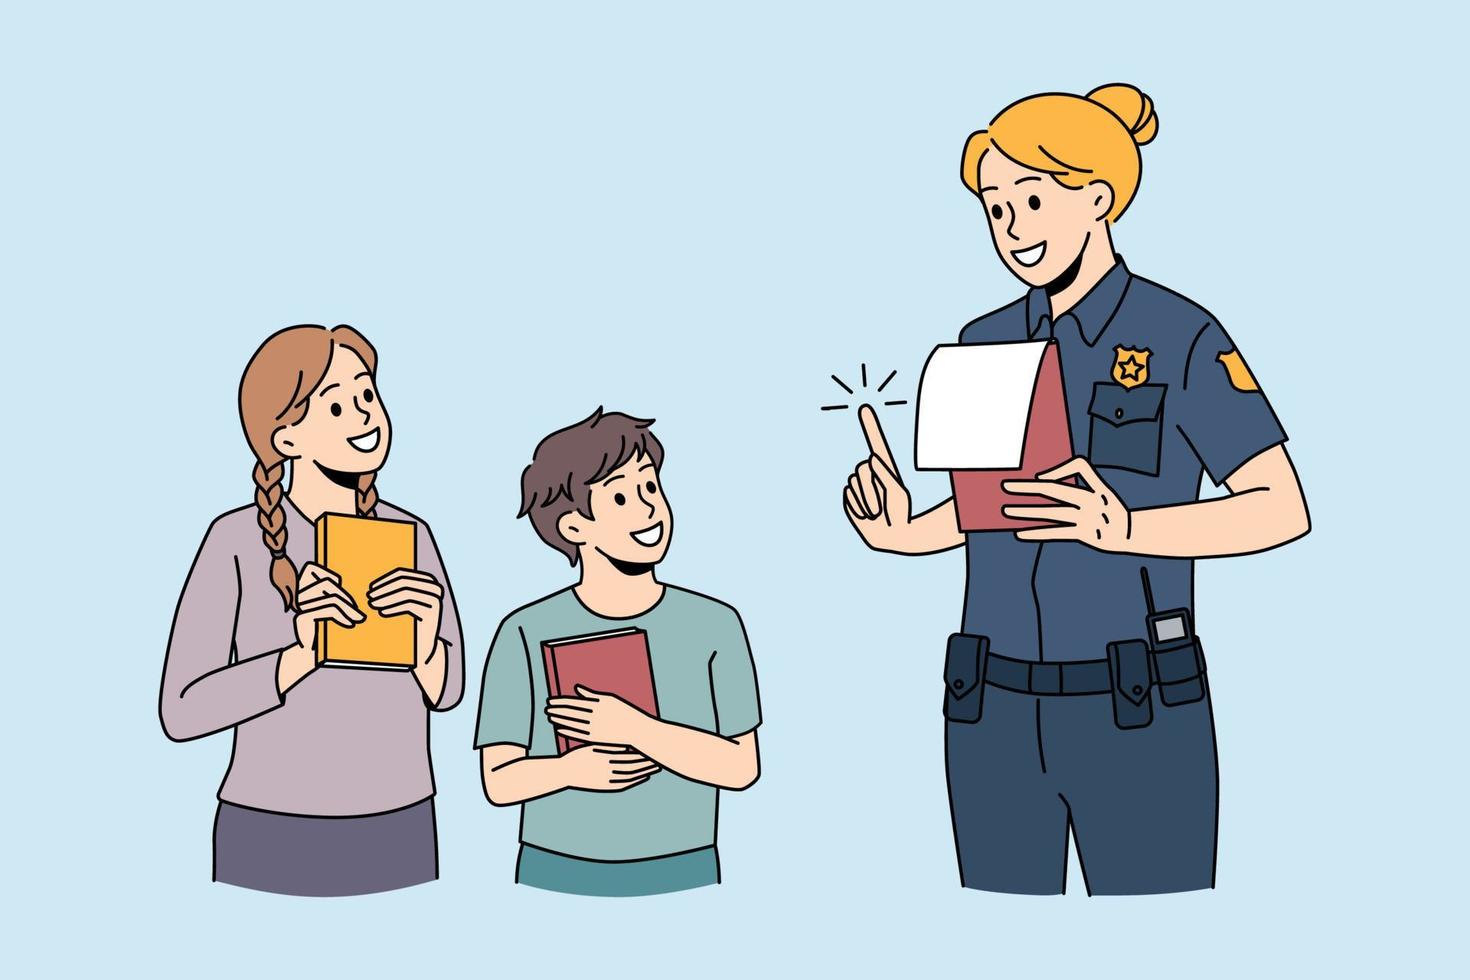 Education and learning police concept. Smiling children standing with notebooks and looking at policewoman telling them rules and teaching vector illustration